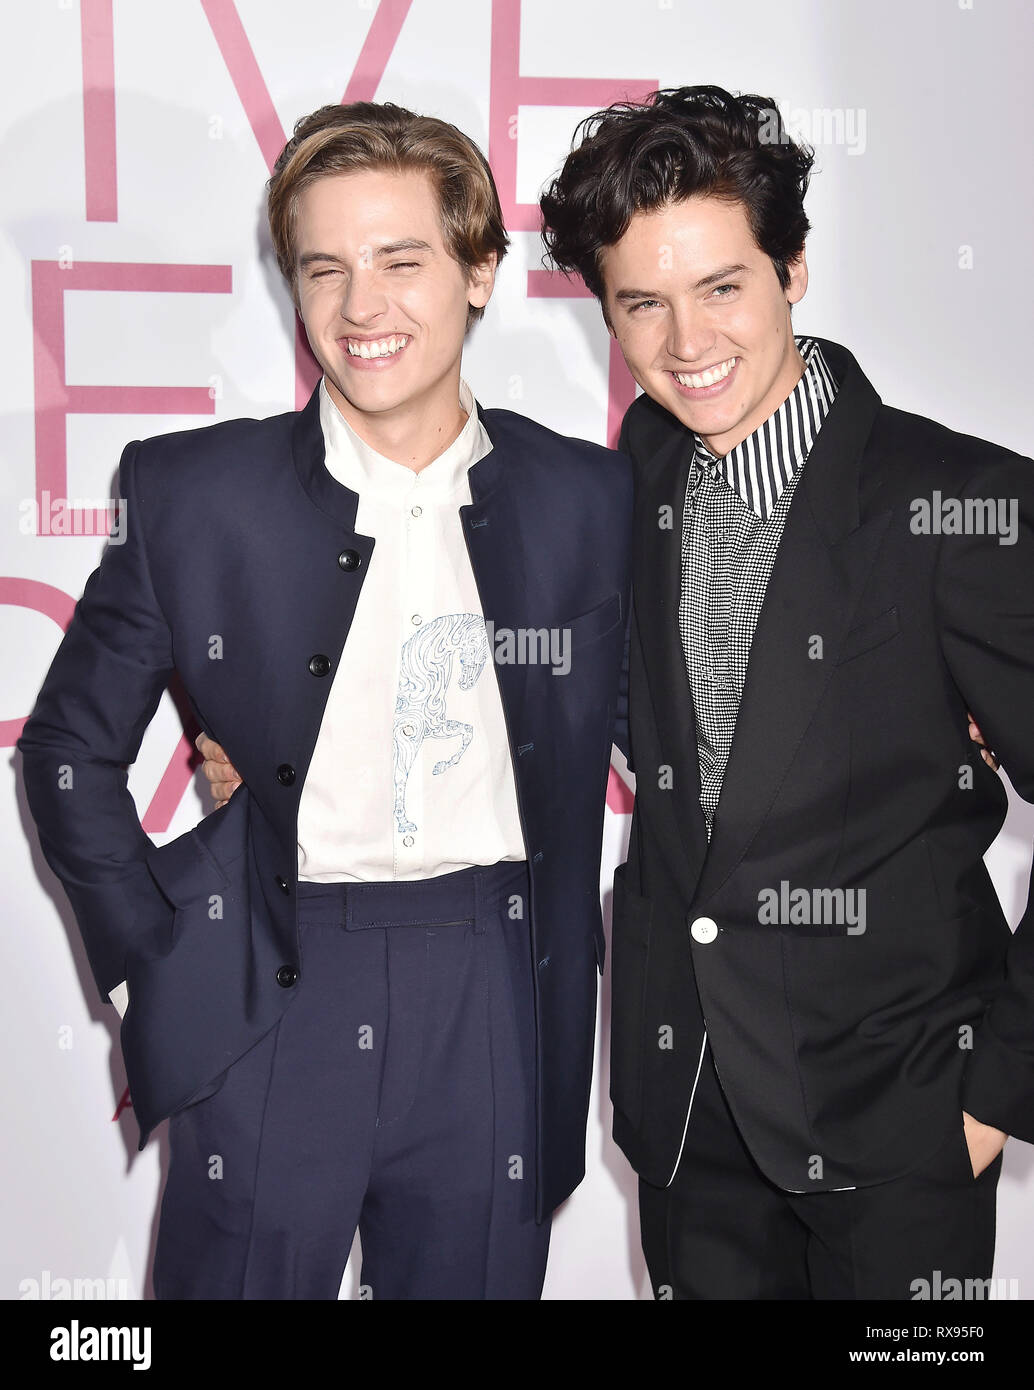 WESTWOOD, CA - MARCH 07: Dylan Spouse (L) and Cole Sprouse attend the Premiere Of Lionsgate's 'Five Feet Apart' at Fox Bruin Theatre on March 07, 2019 Stock Photo